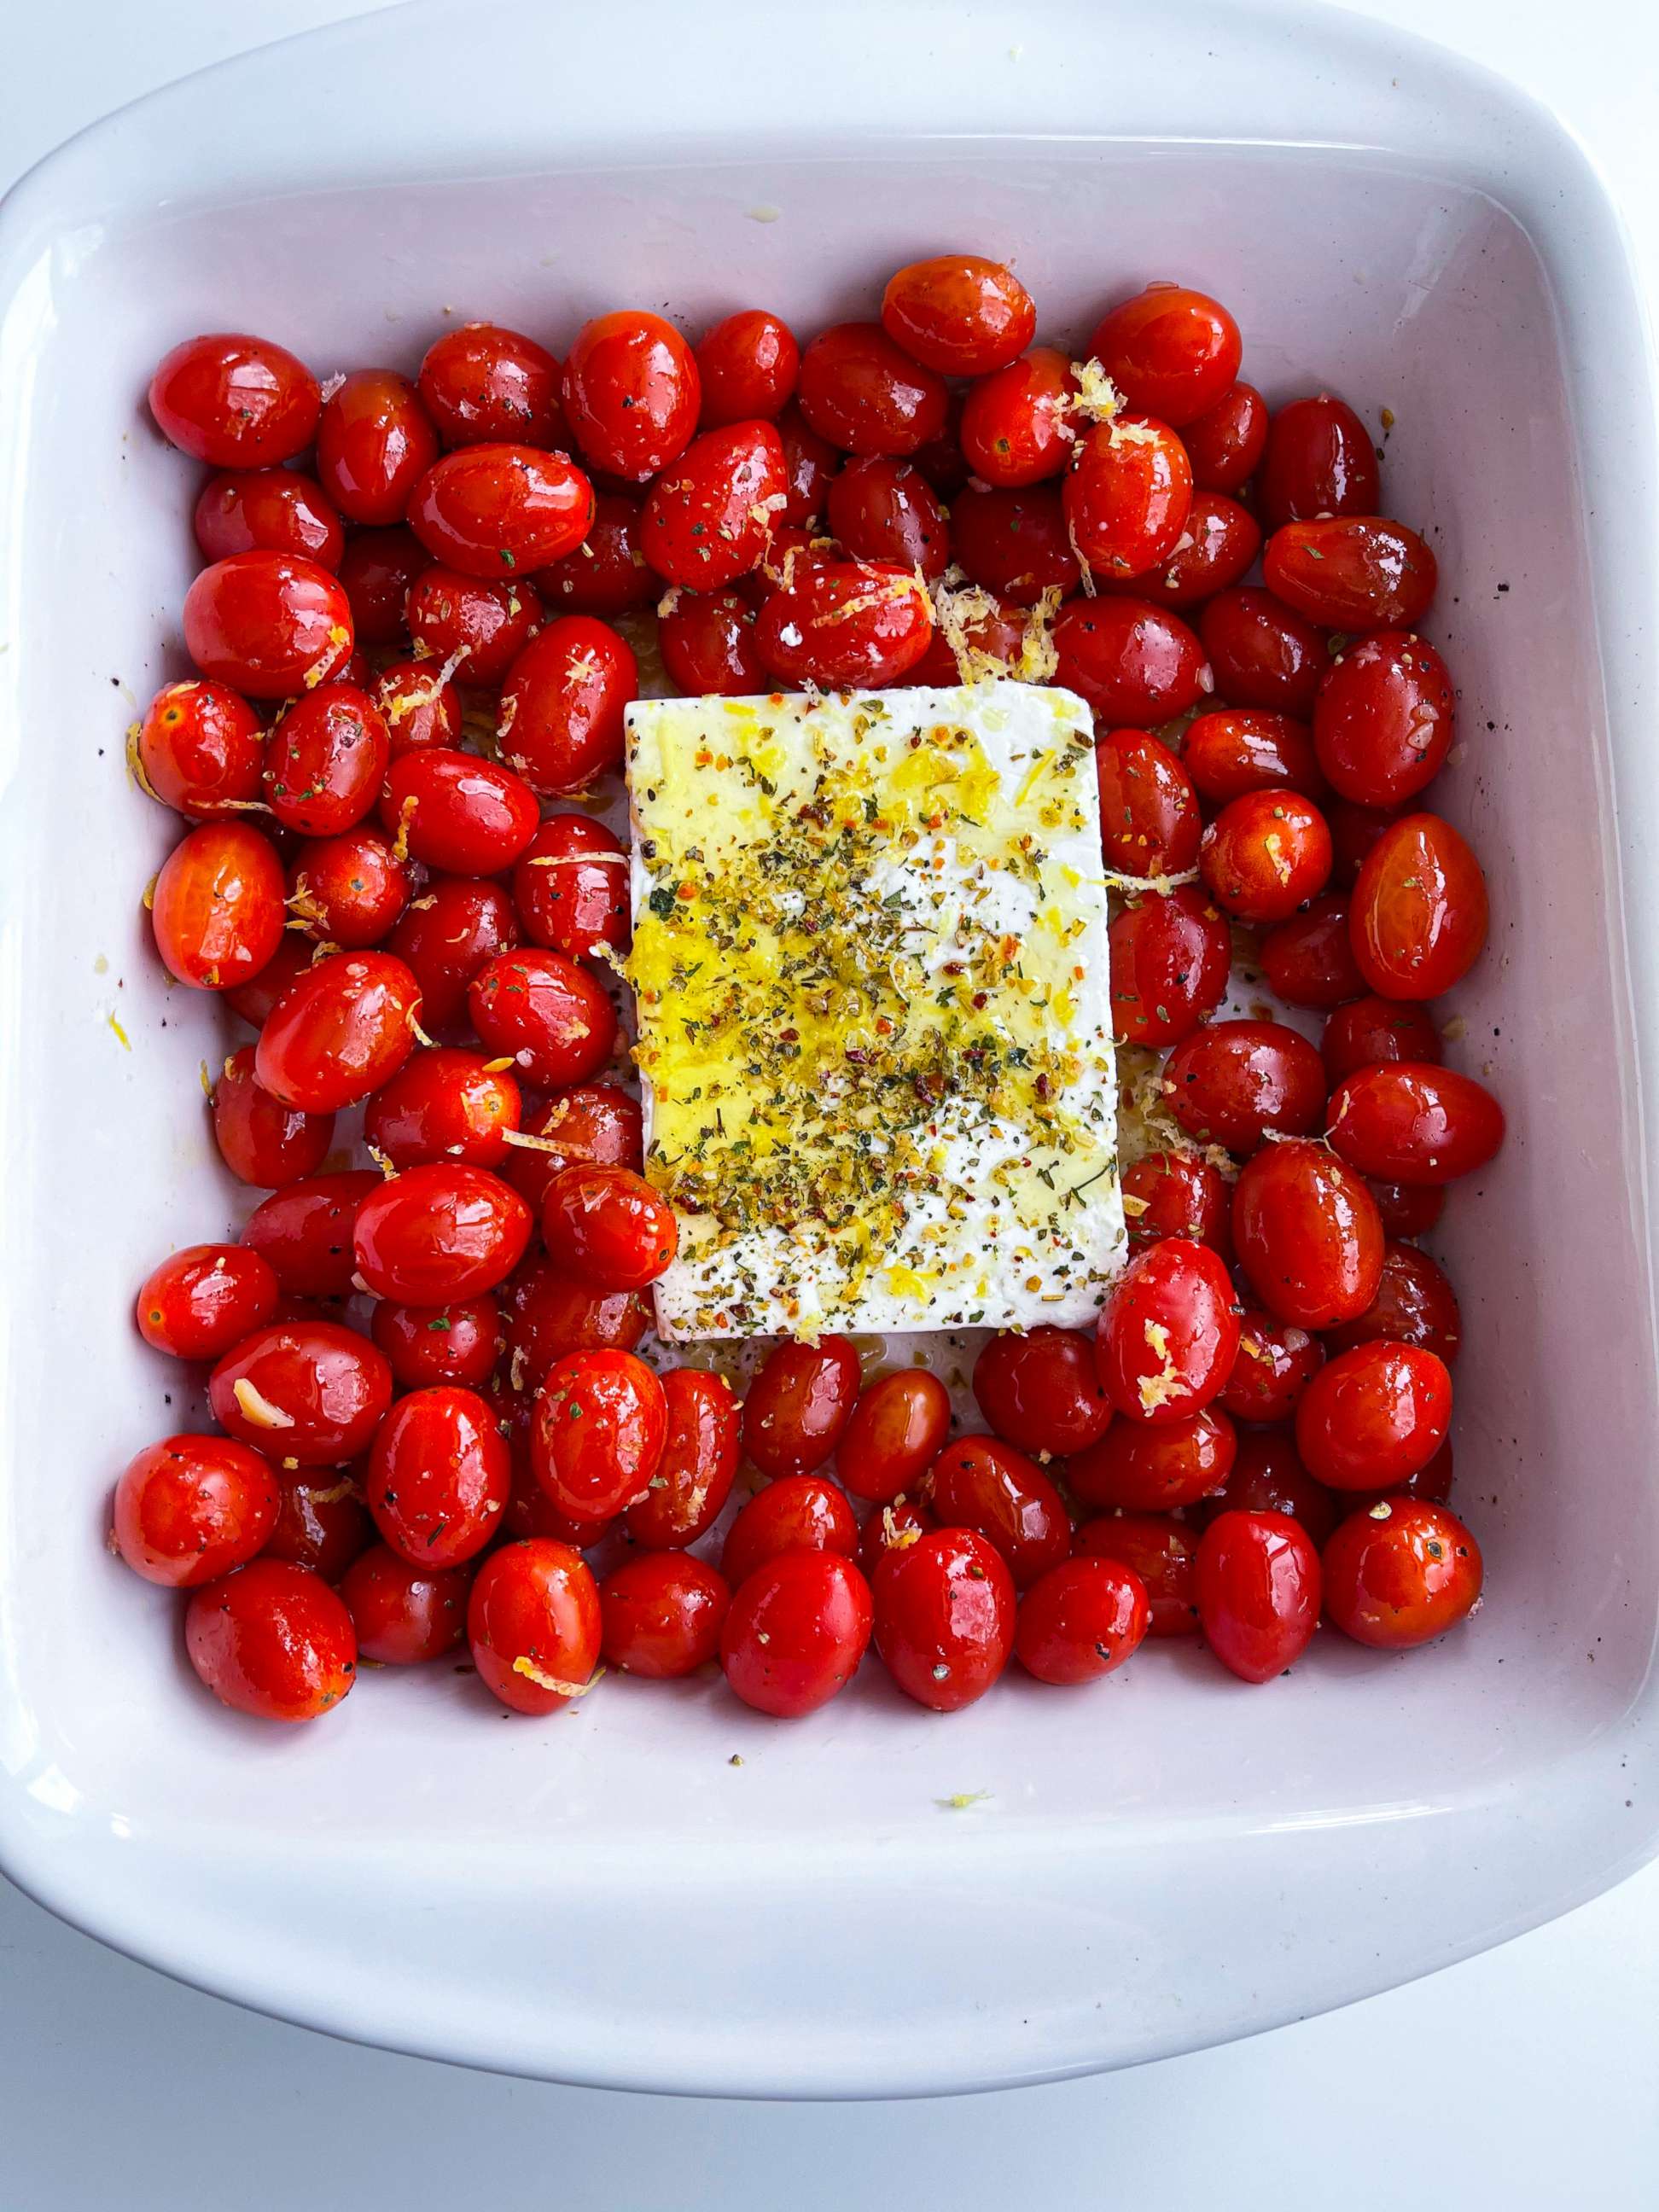 PHOTO: Tomatoes, feta cheese, herbs, olive oil and lemon zest ready to be roasted in the oven.